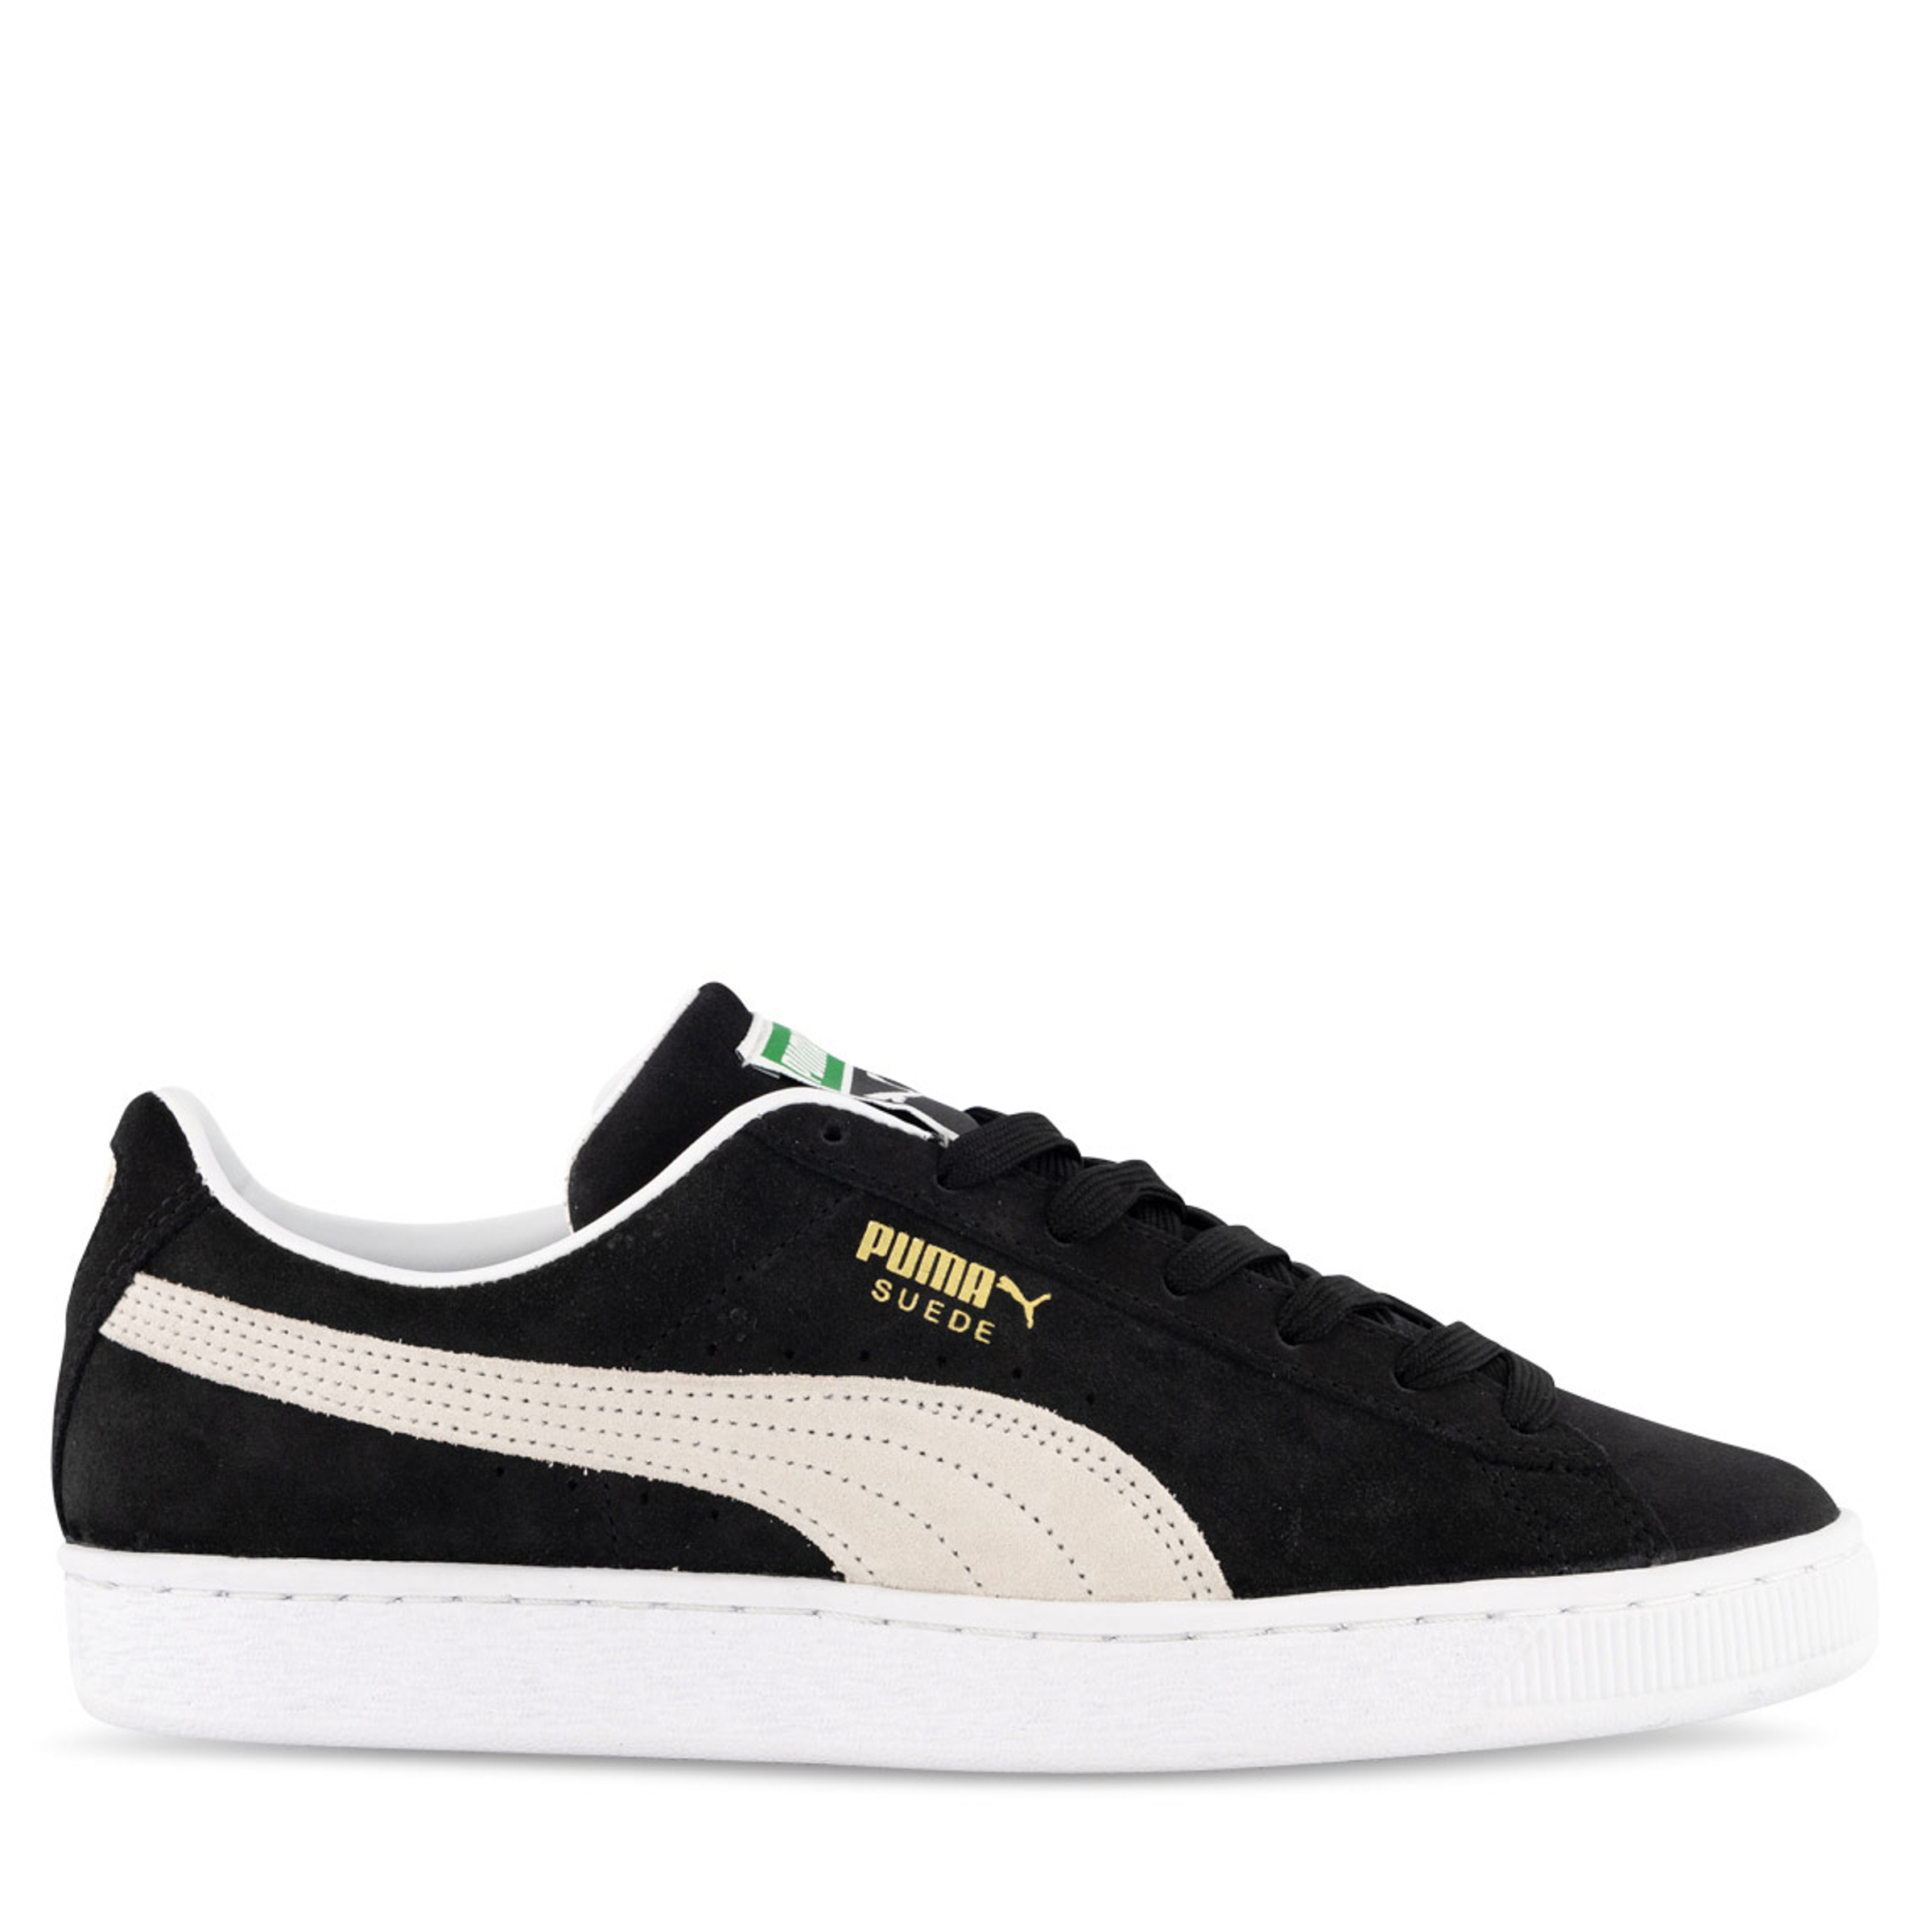 Suede Classic XXI Men's Sneakers PUMA | vlr.eng.br